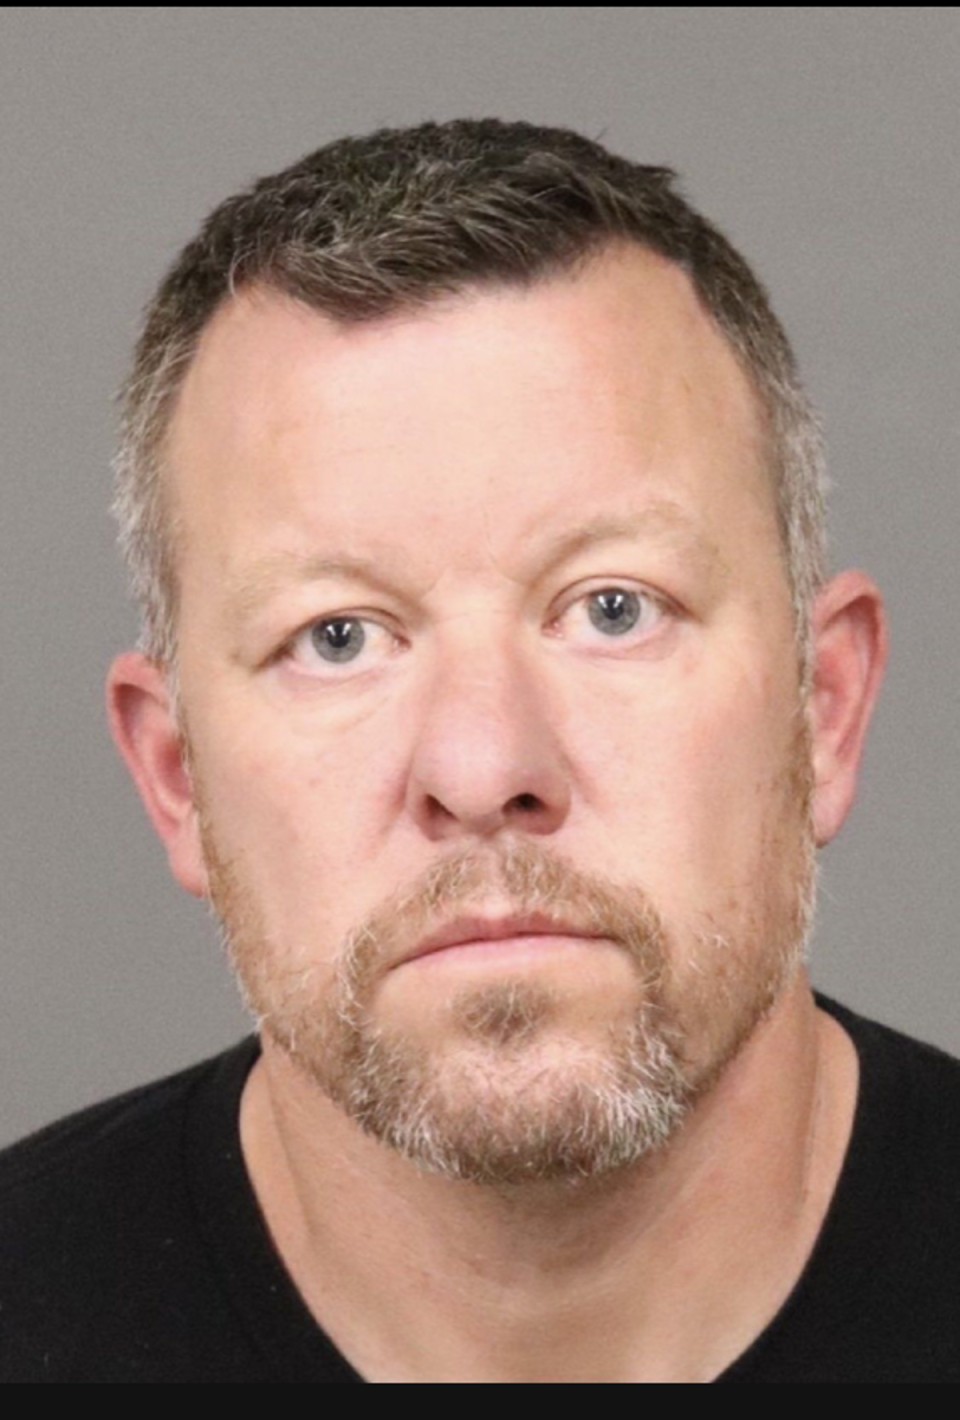 Prosecutors said that Paul Flores killed Kristin Smart while trying to rape her in his dorm room (San Luis Obispo Sheriff’s Office)